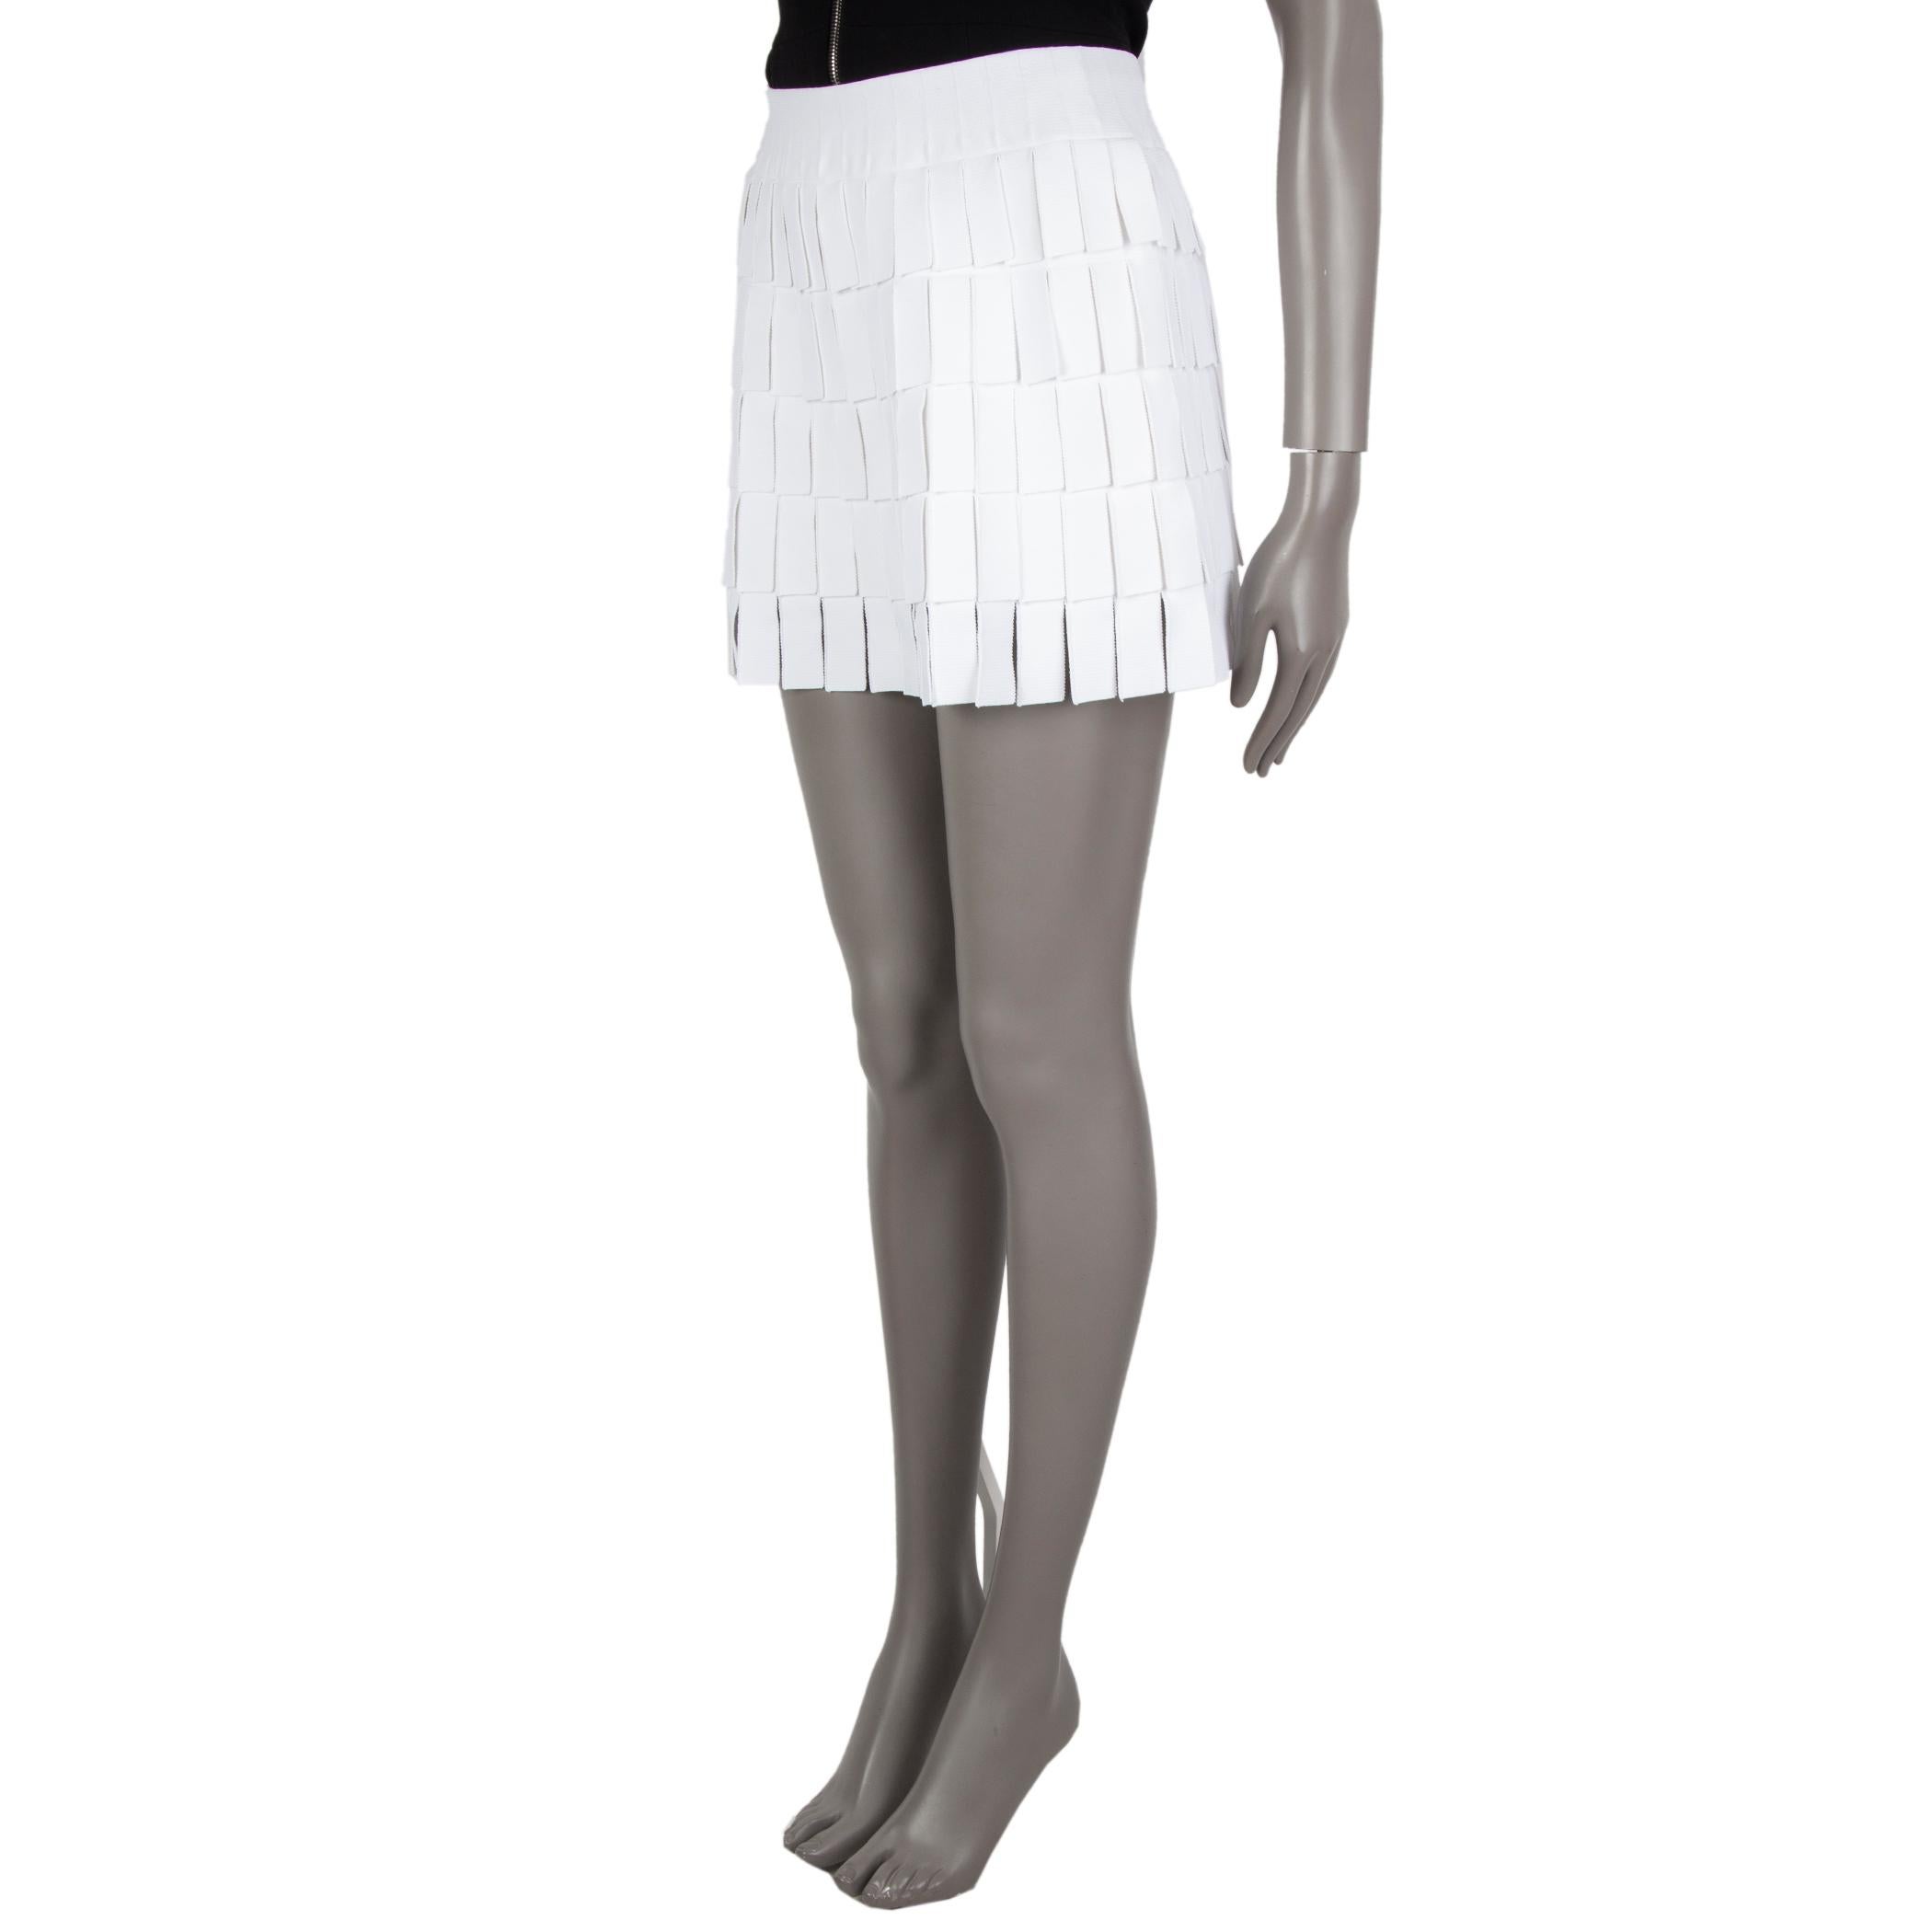 Alaia mini-skirt in white viscose (84%) polyester (10%) polyamide (4%) elastane (2%) with an elastic waistband layer of fringe to slip on. Lined with shorts viscose (66%) polyamide (16%) polyester (14%) elastane (4%).  Has been worn and is in